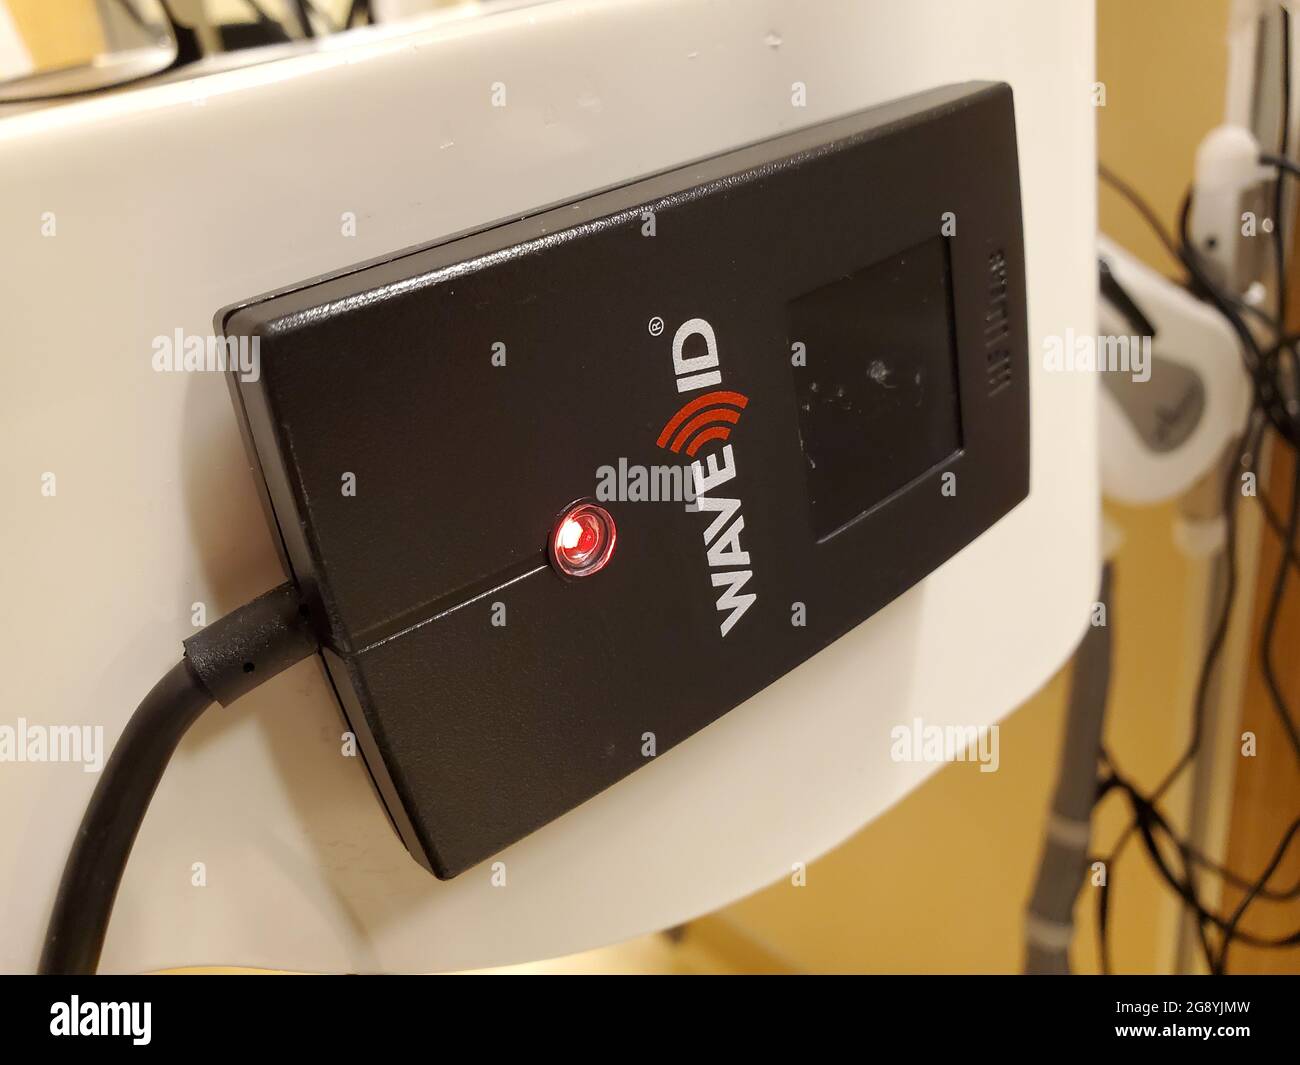 Close-up of a mounted 'Wave ID' contactless identification card reader in a medical setting in San Francisco, California, April 18, 2021. (Photo by Smith Collection/Gado/Sipa USA) Stock Photo